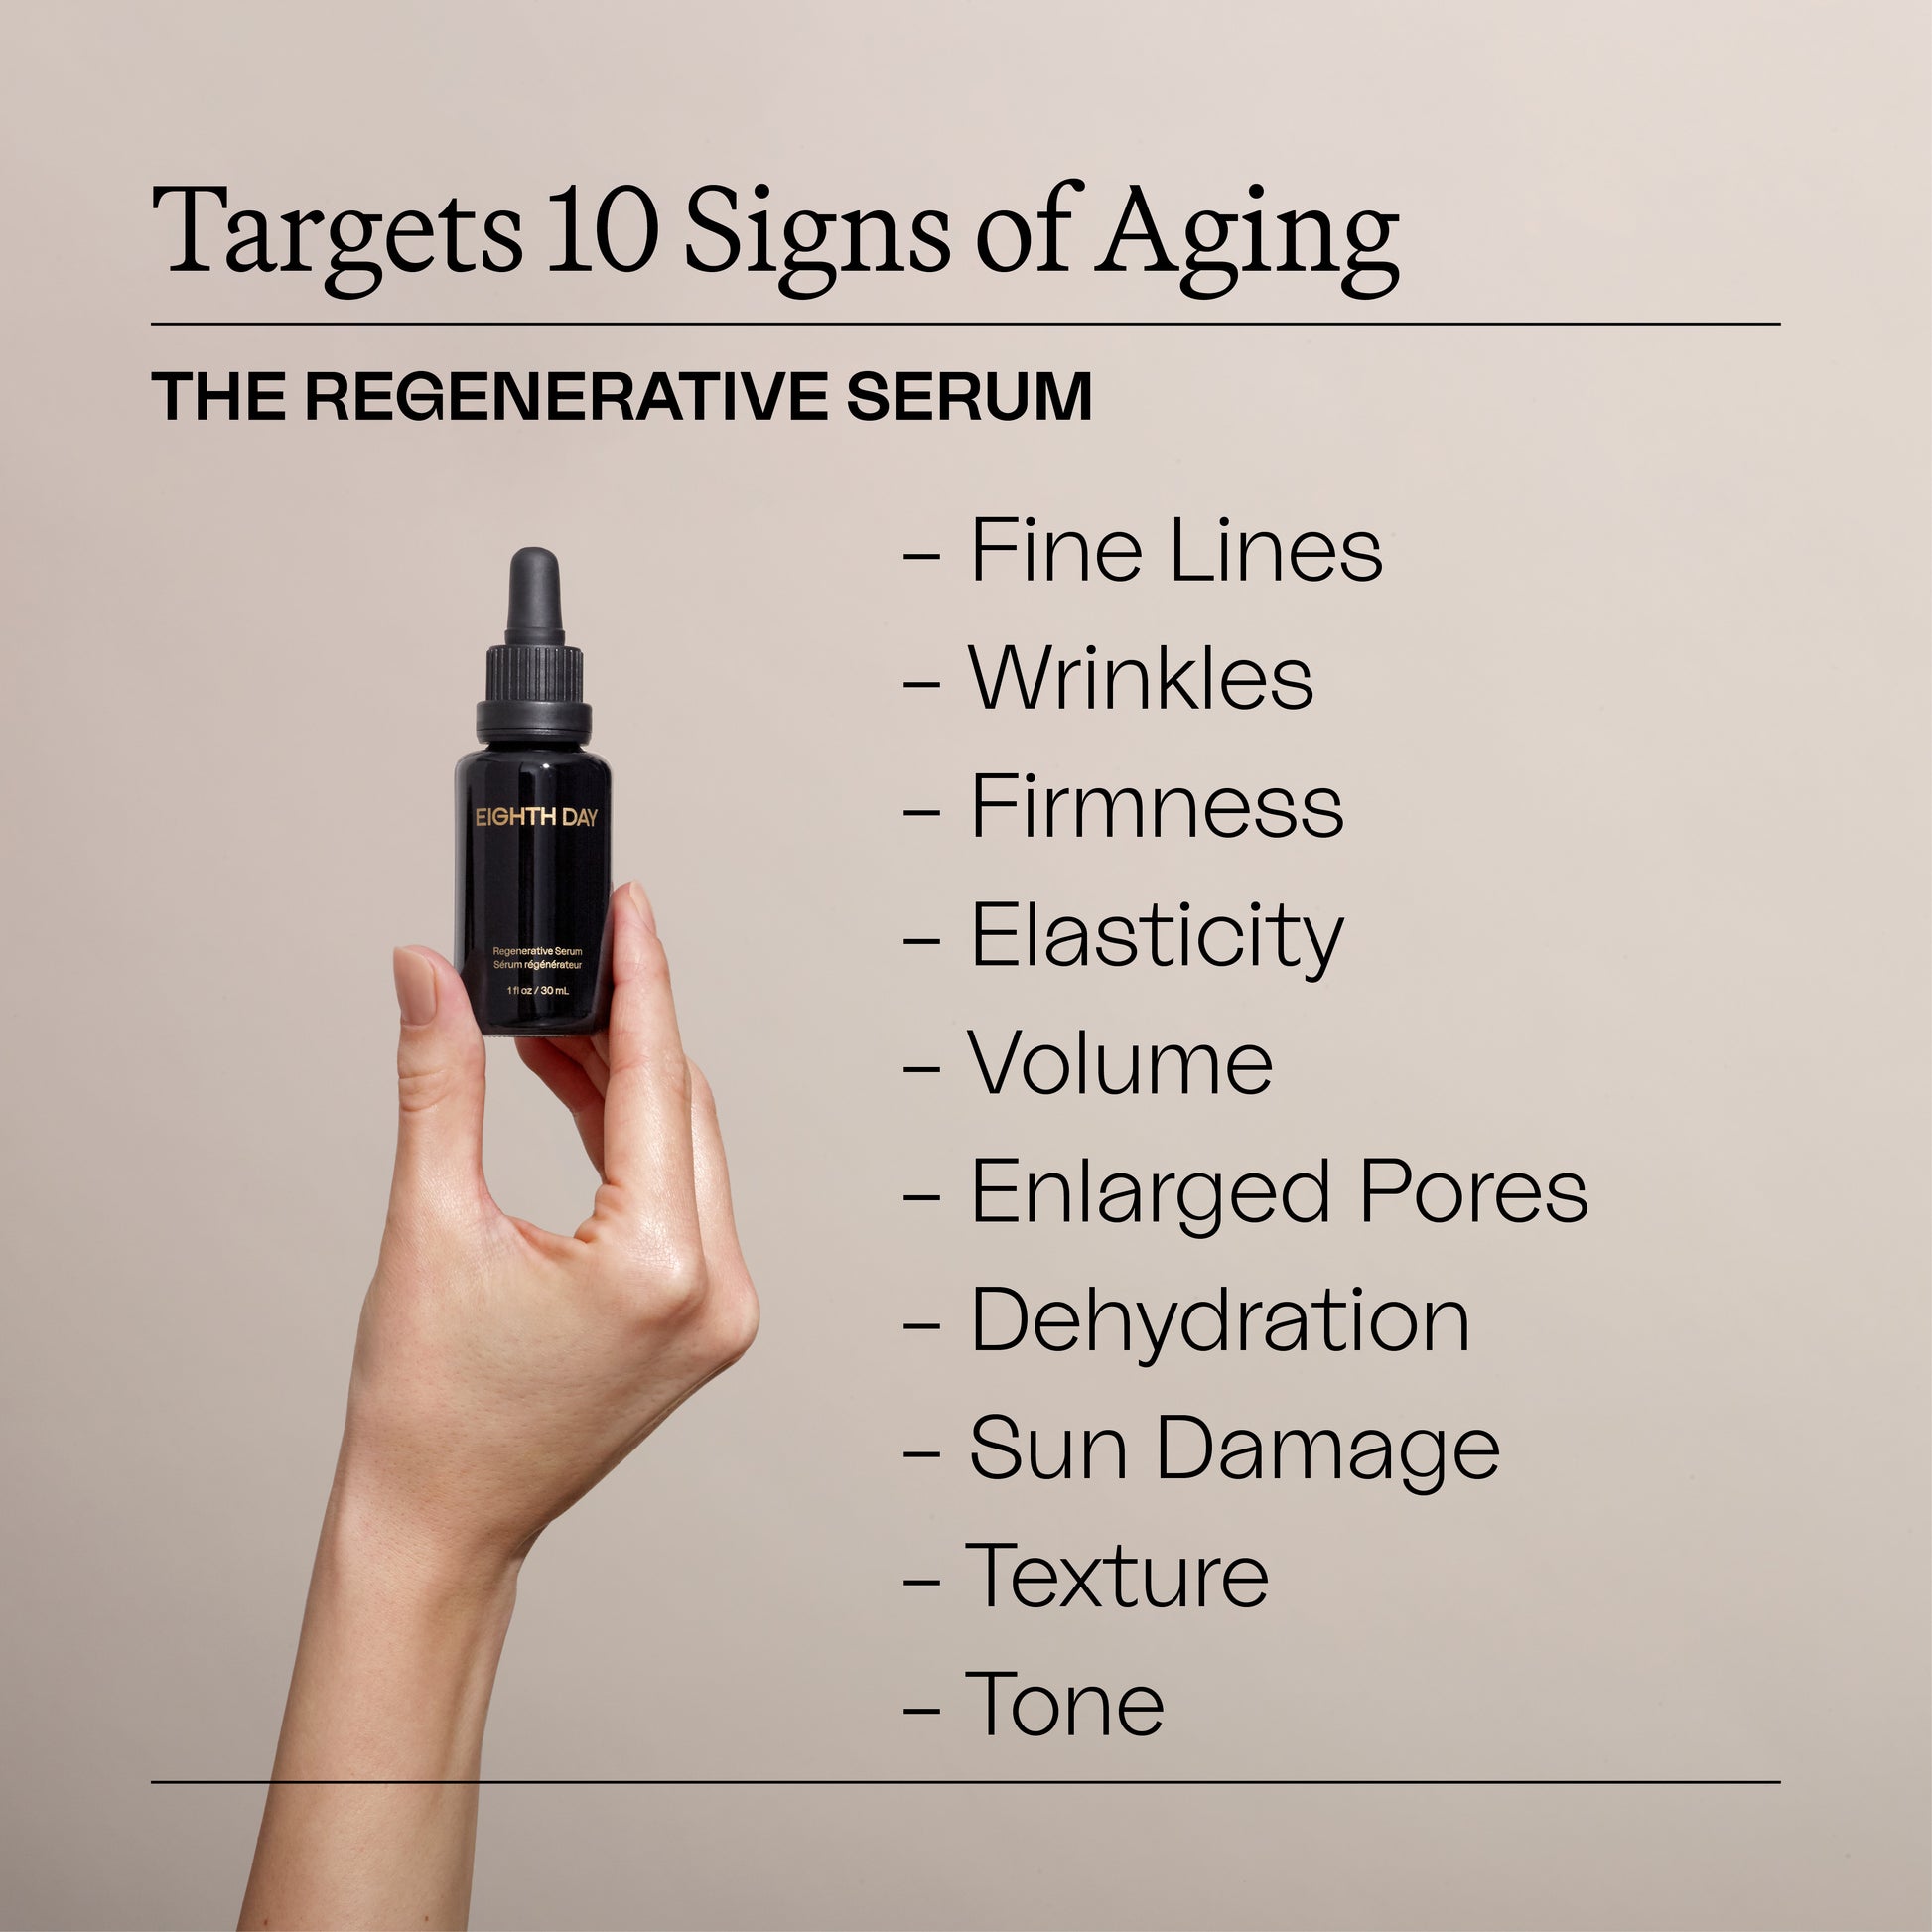 Eighth Day Skincare's Regenerative Serum targets the 10 signs of aging: fine lines, wrinkles, firmness, elasticity, volume, enlarged pore, dehydration, sun damage, texture, and tone.